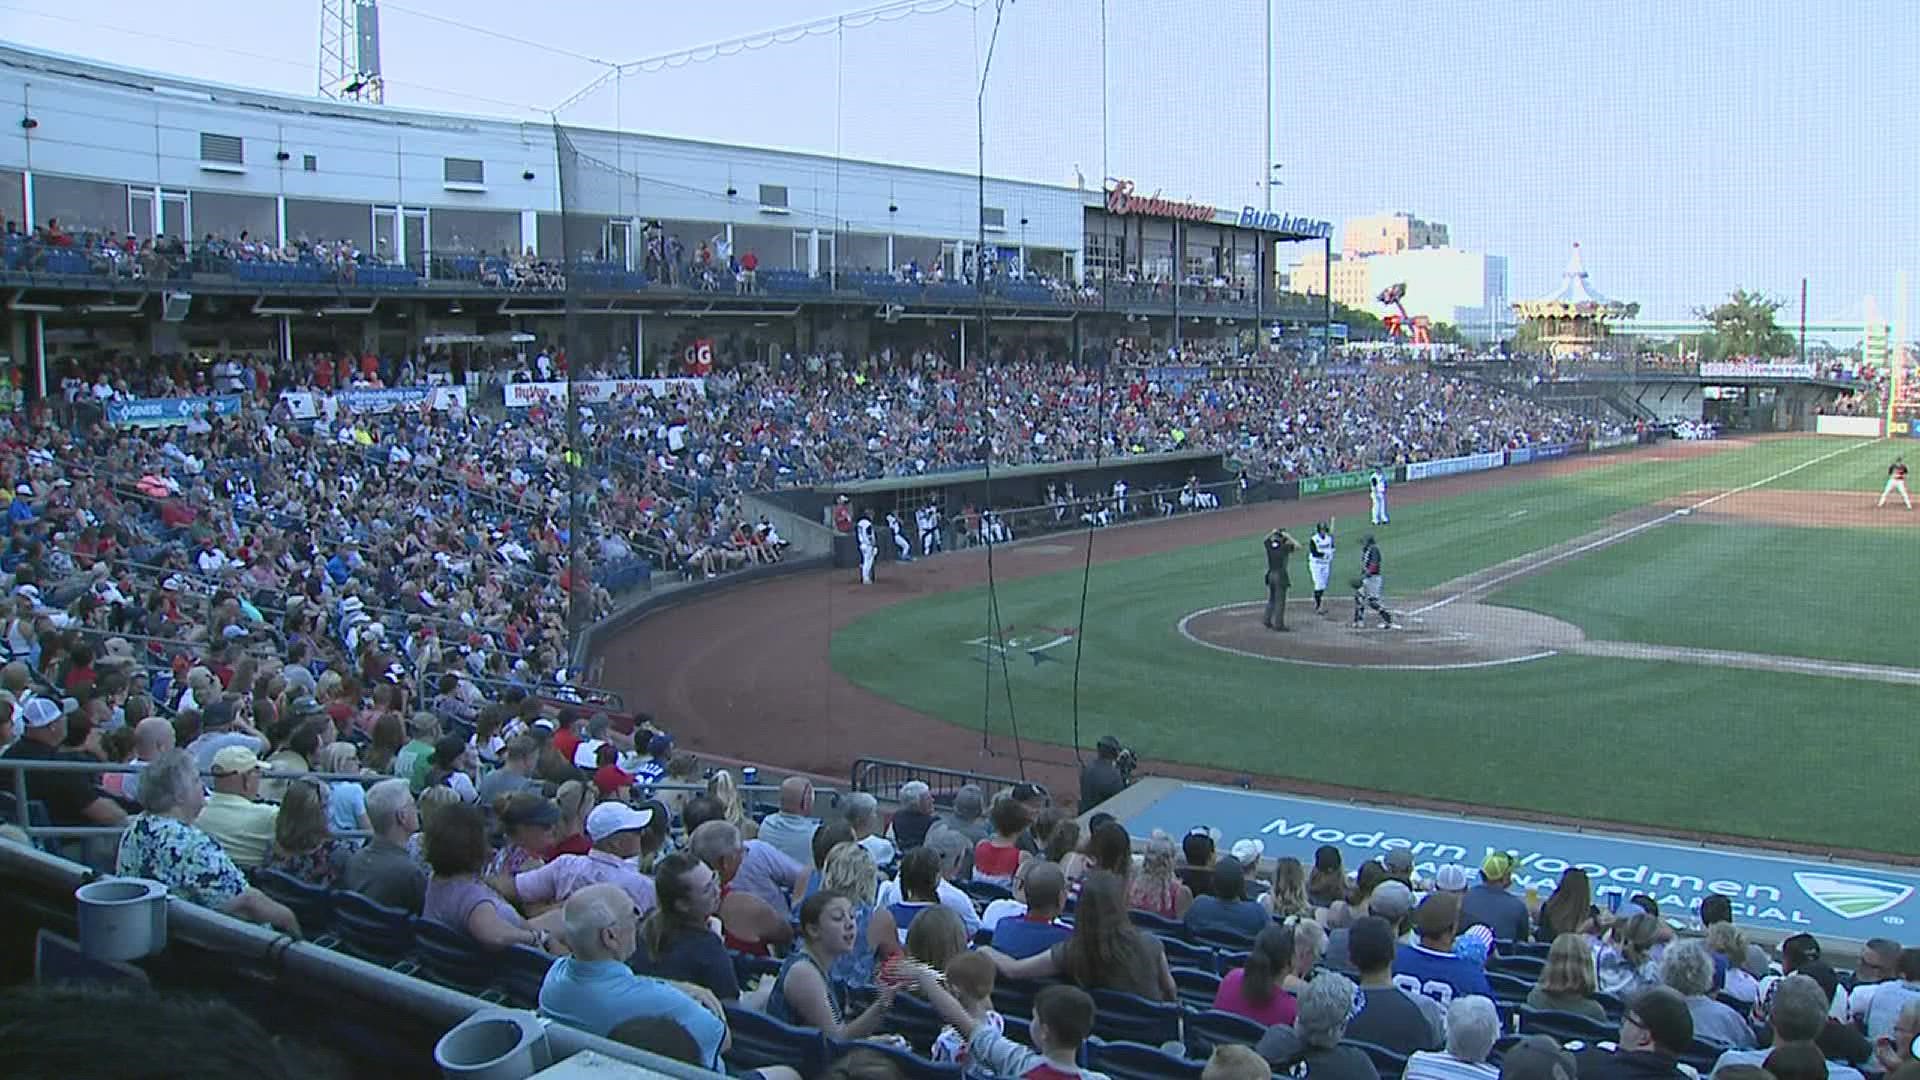 River Bandits, other minor league teams still on track for season